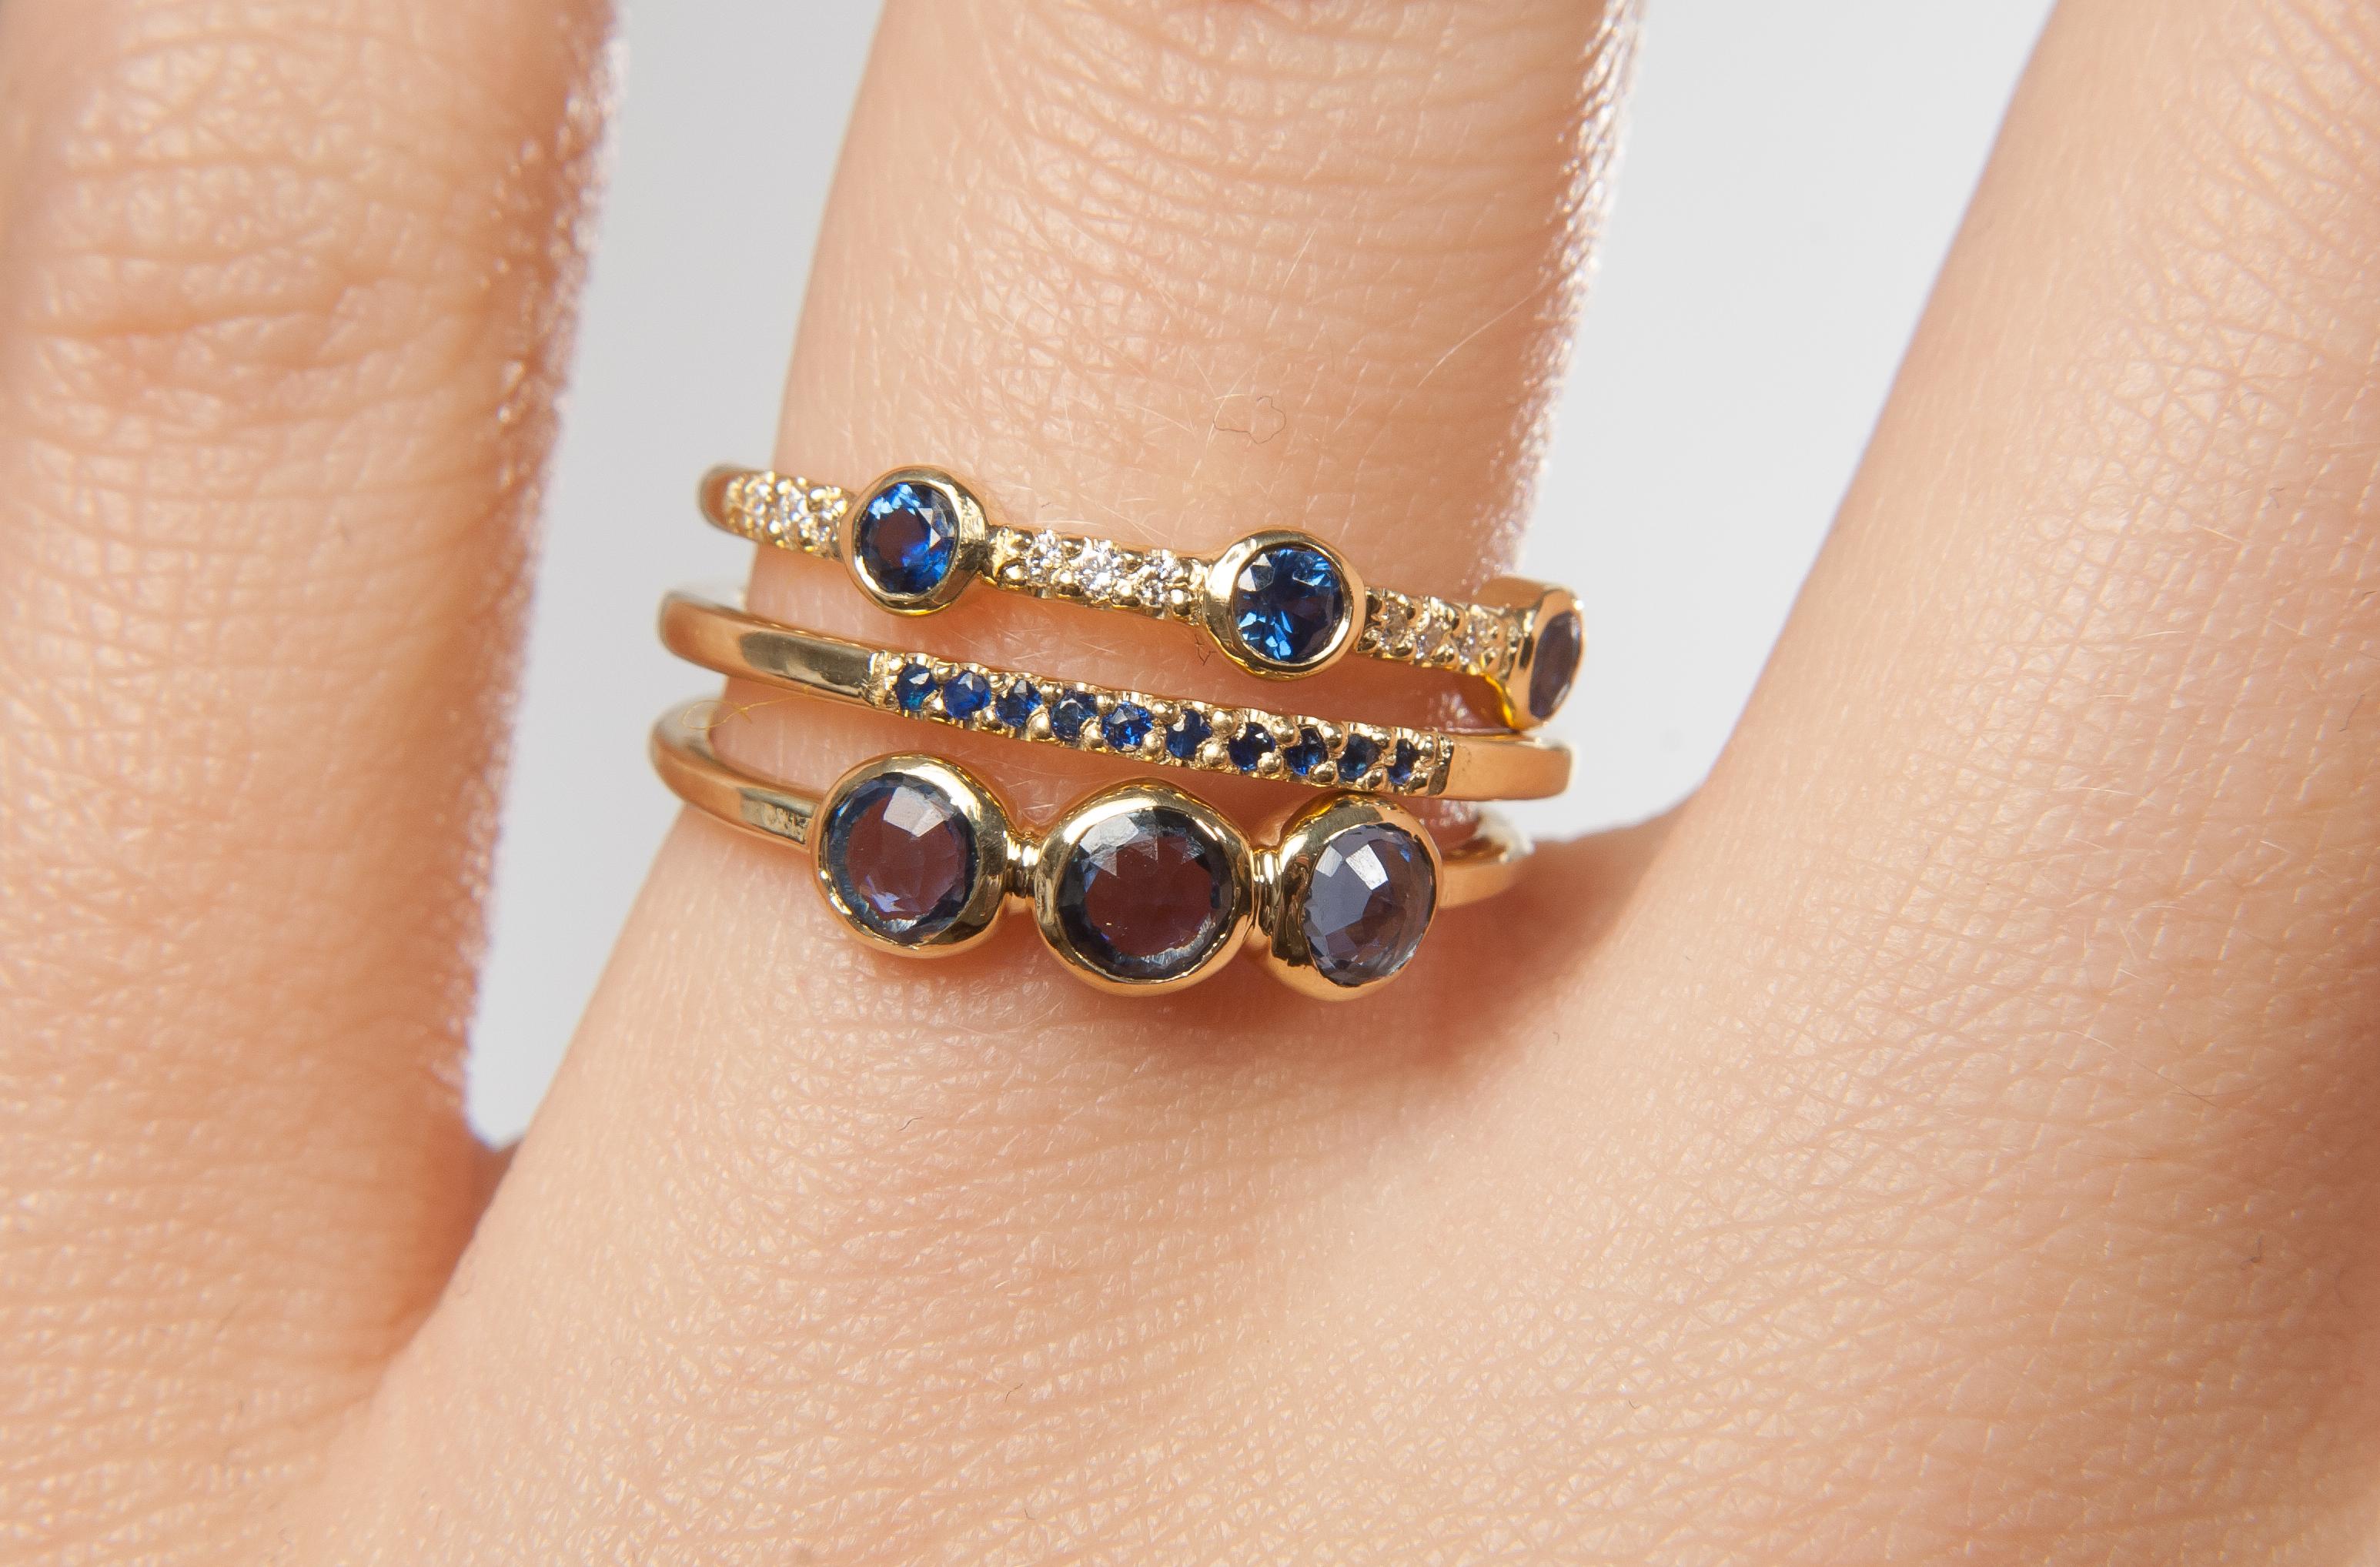 A trio of deep blue sapphires is enhanced with pavé set white diamonds on this delicate gold band.

18K yellow gold band featuring three bezel set 0.10” blue sapphires between pavé white diamonds.